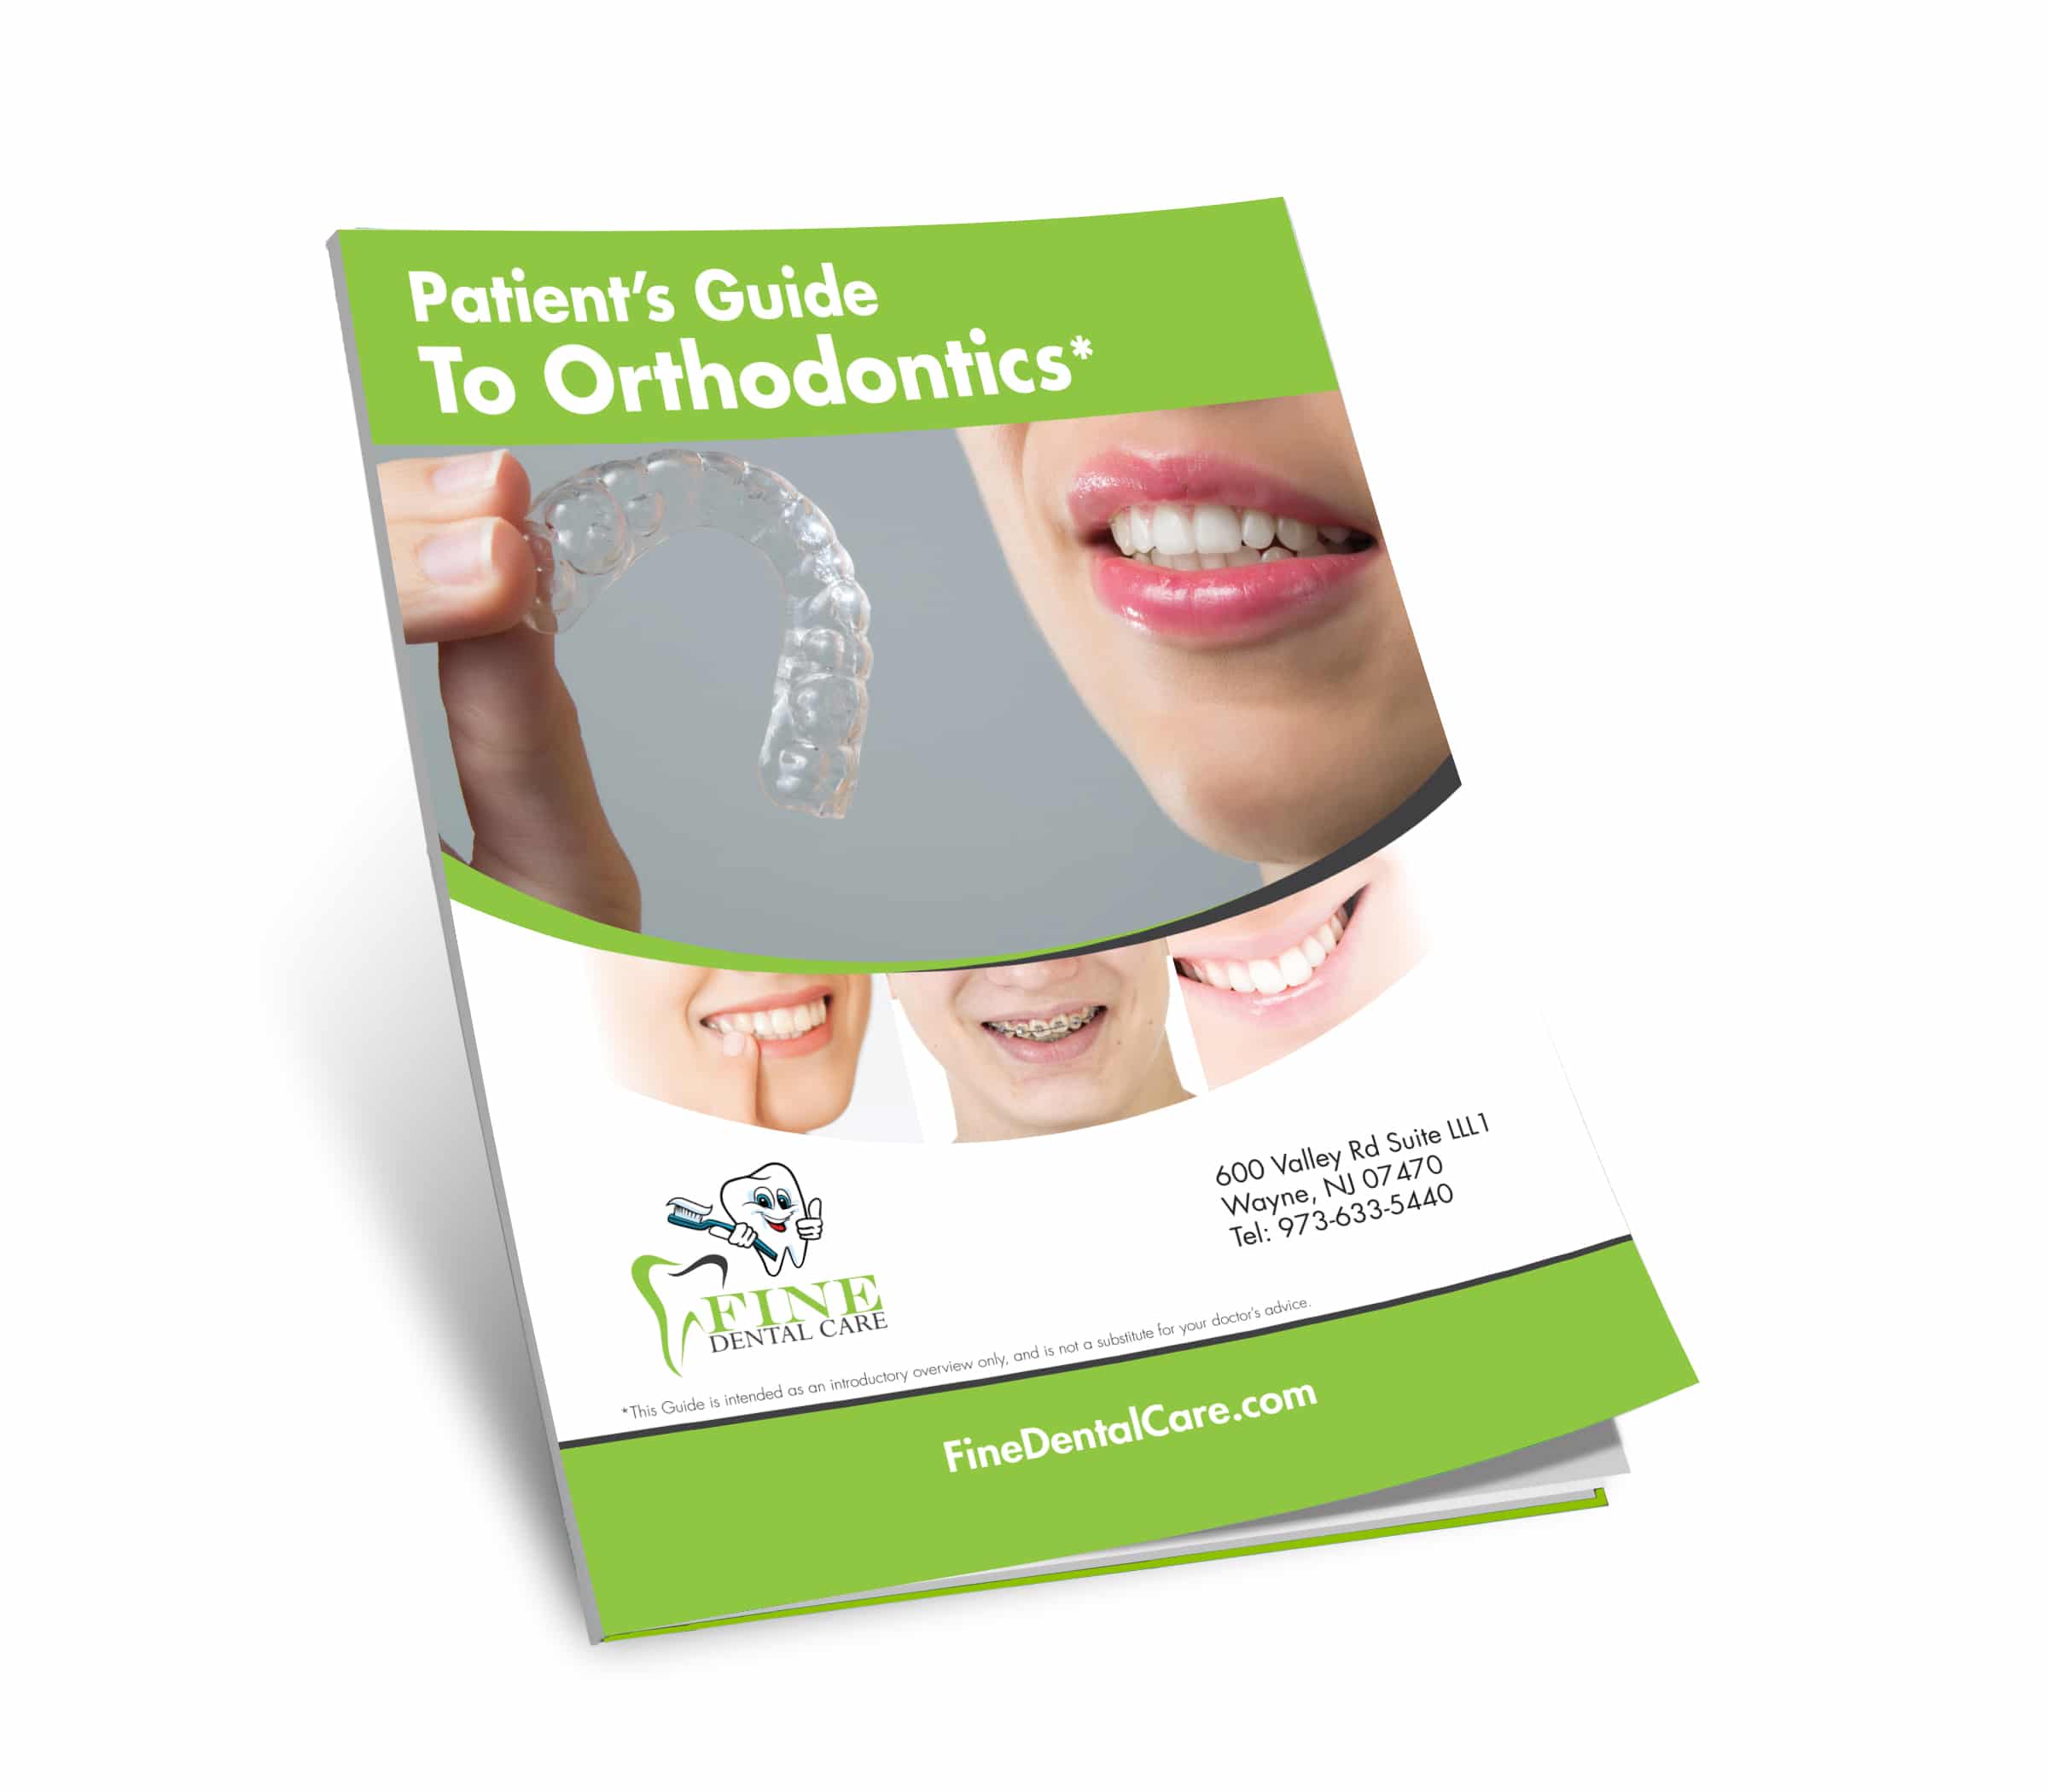 Patients Guide to Orthodontics